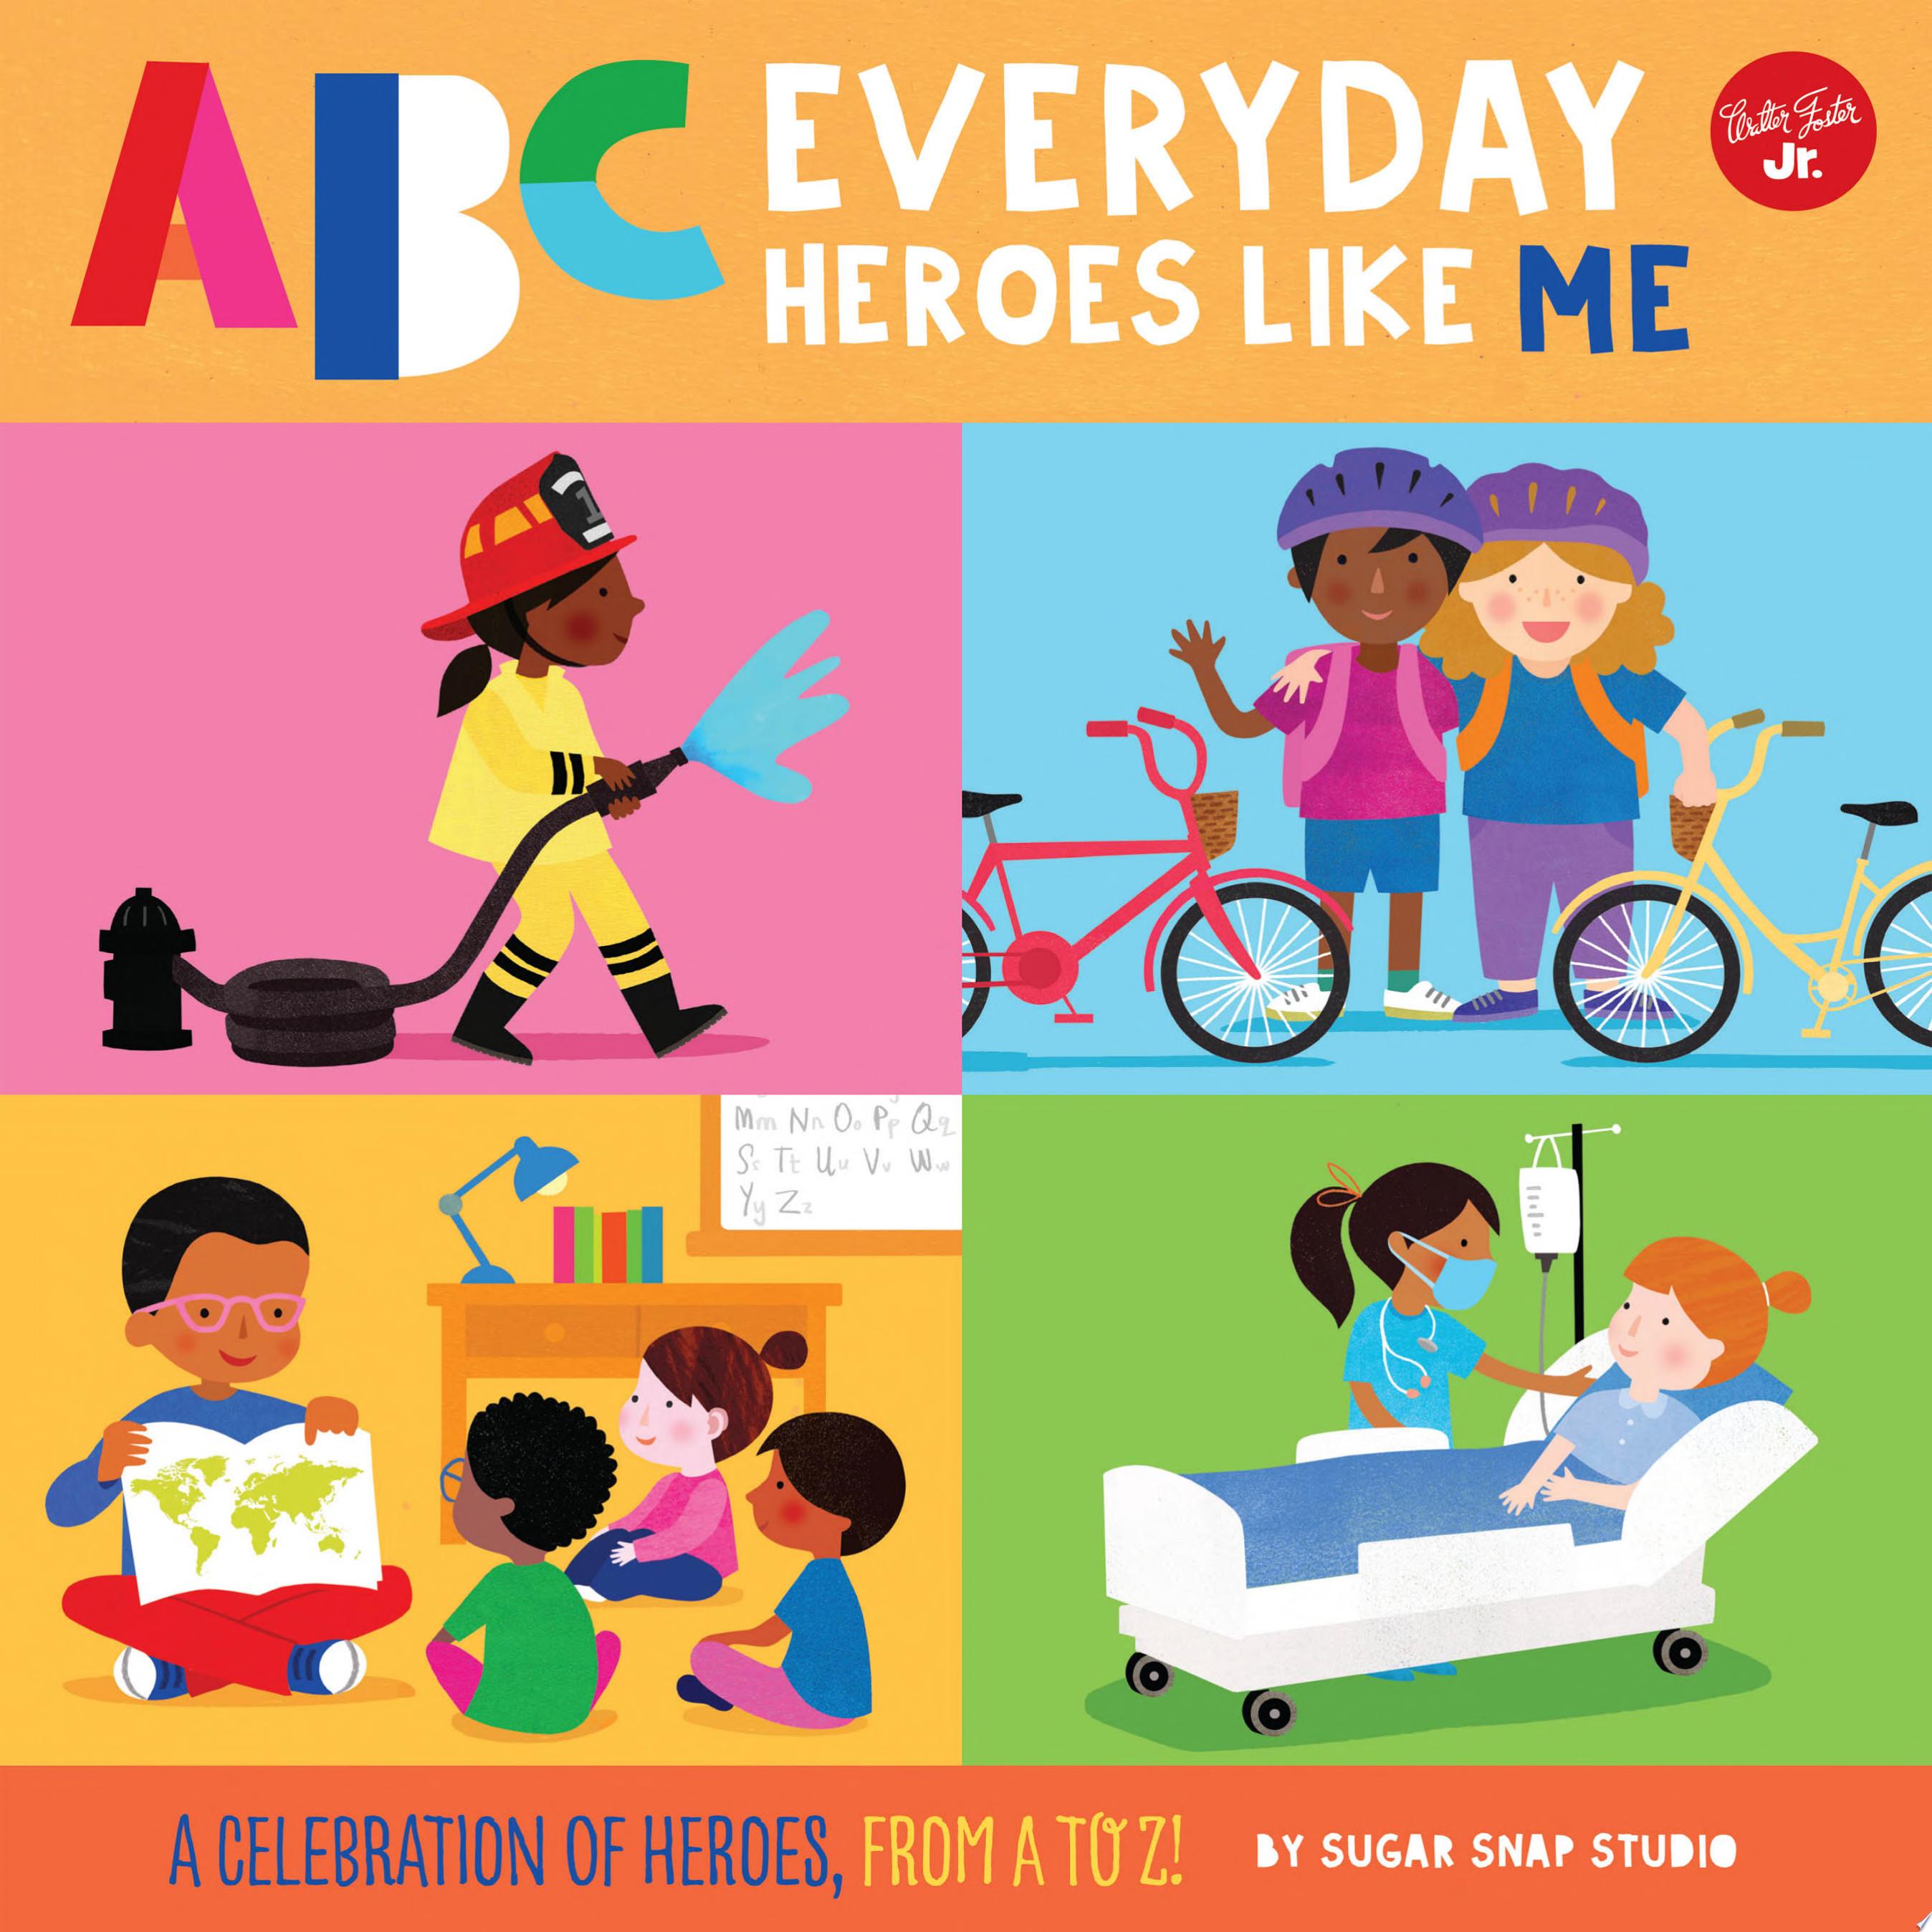 Image for "ABC for Me: ABC Everyday Heroes Like Me"